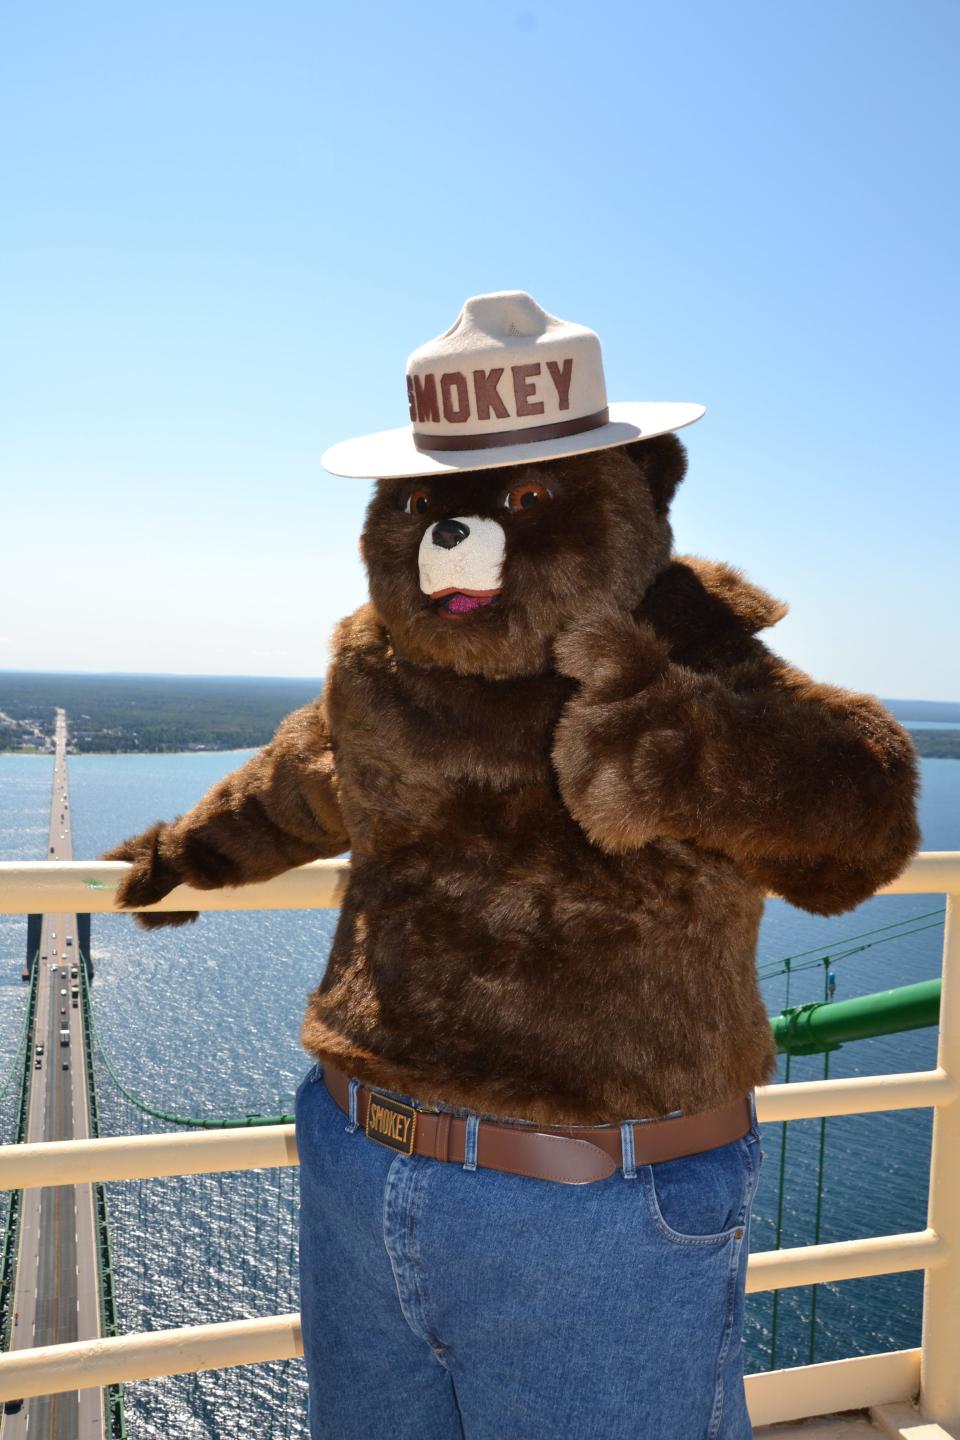 The Michigan Department of Natural Resources uses Smokey Bear suits to discuss fire prevention throughout the state.